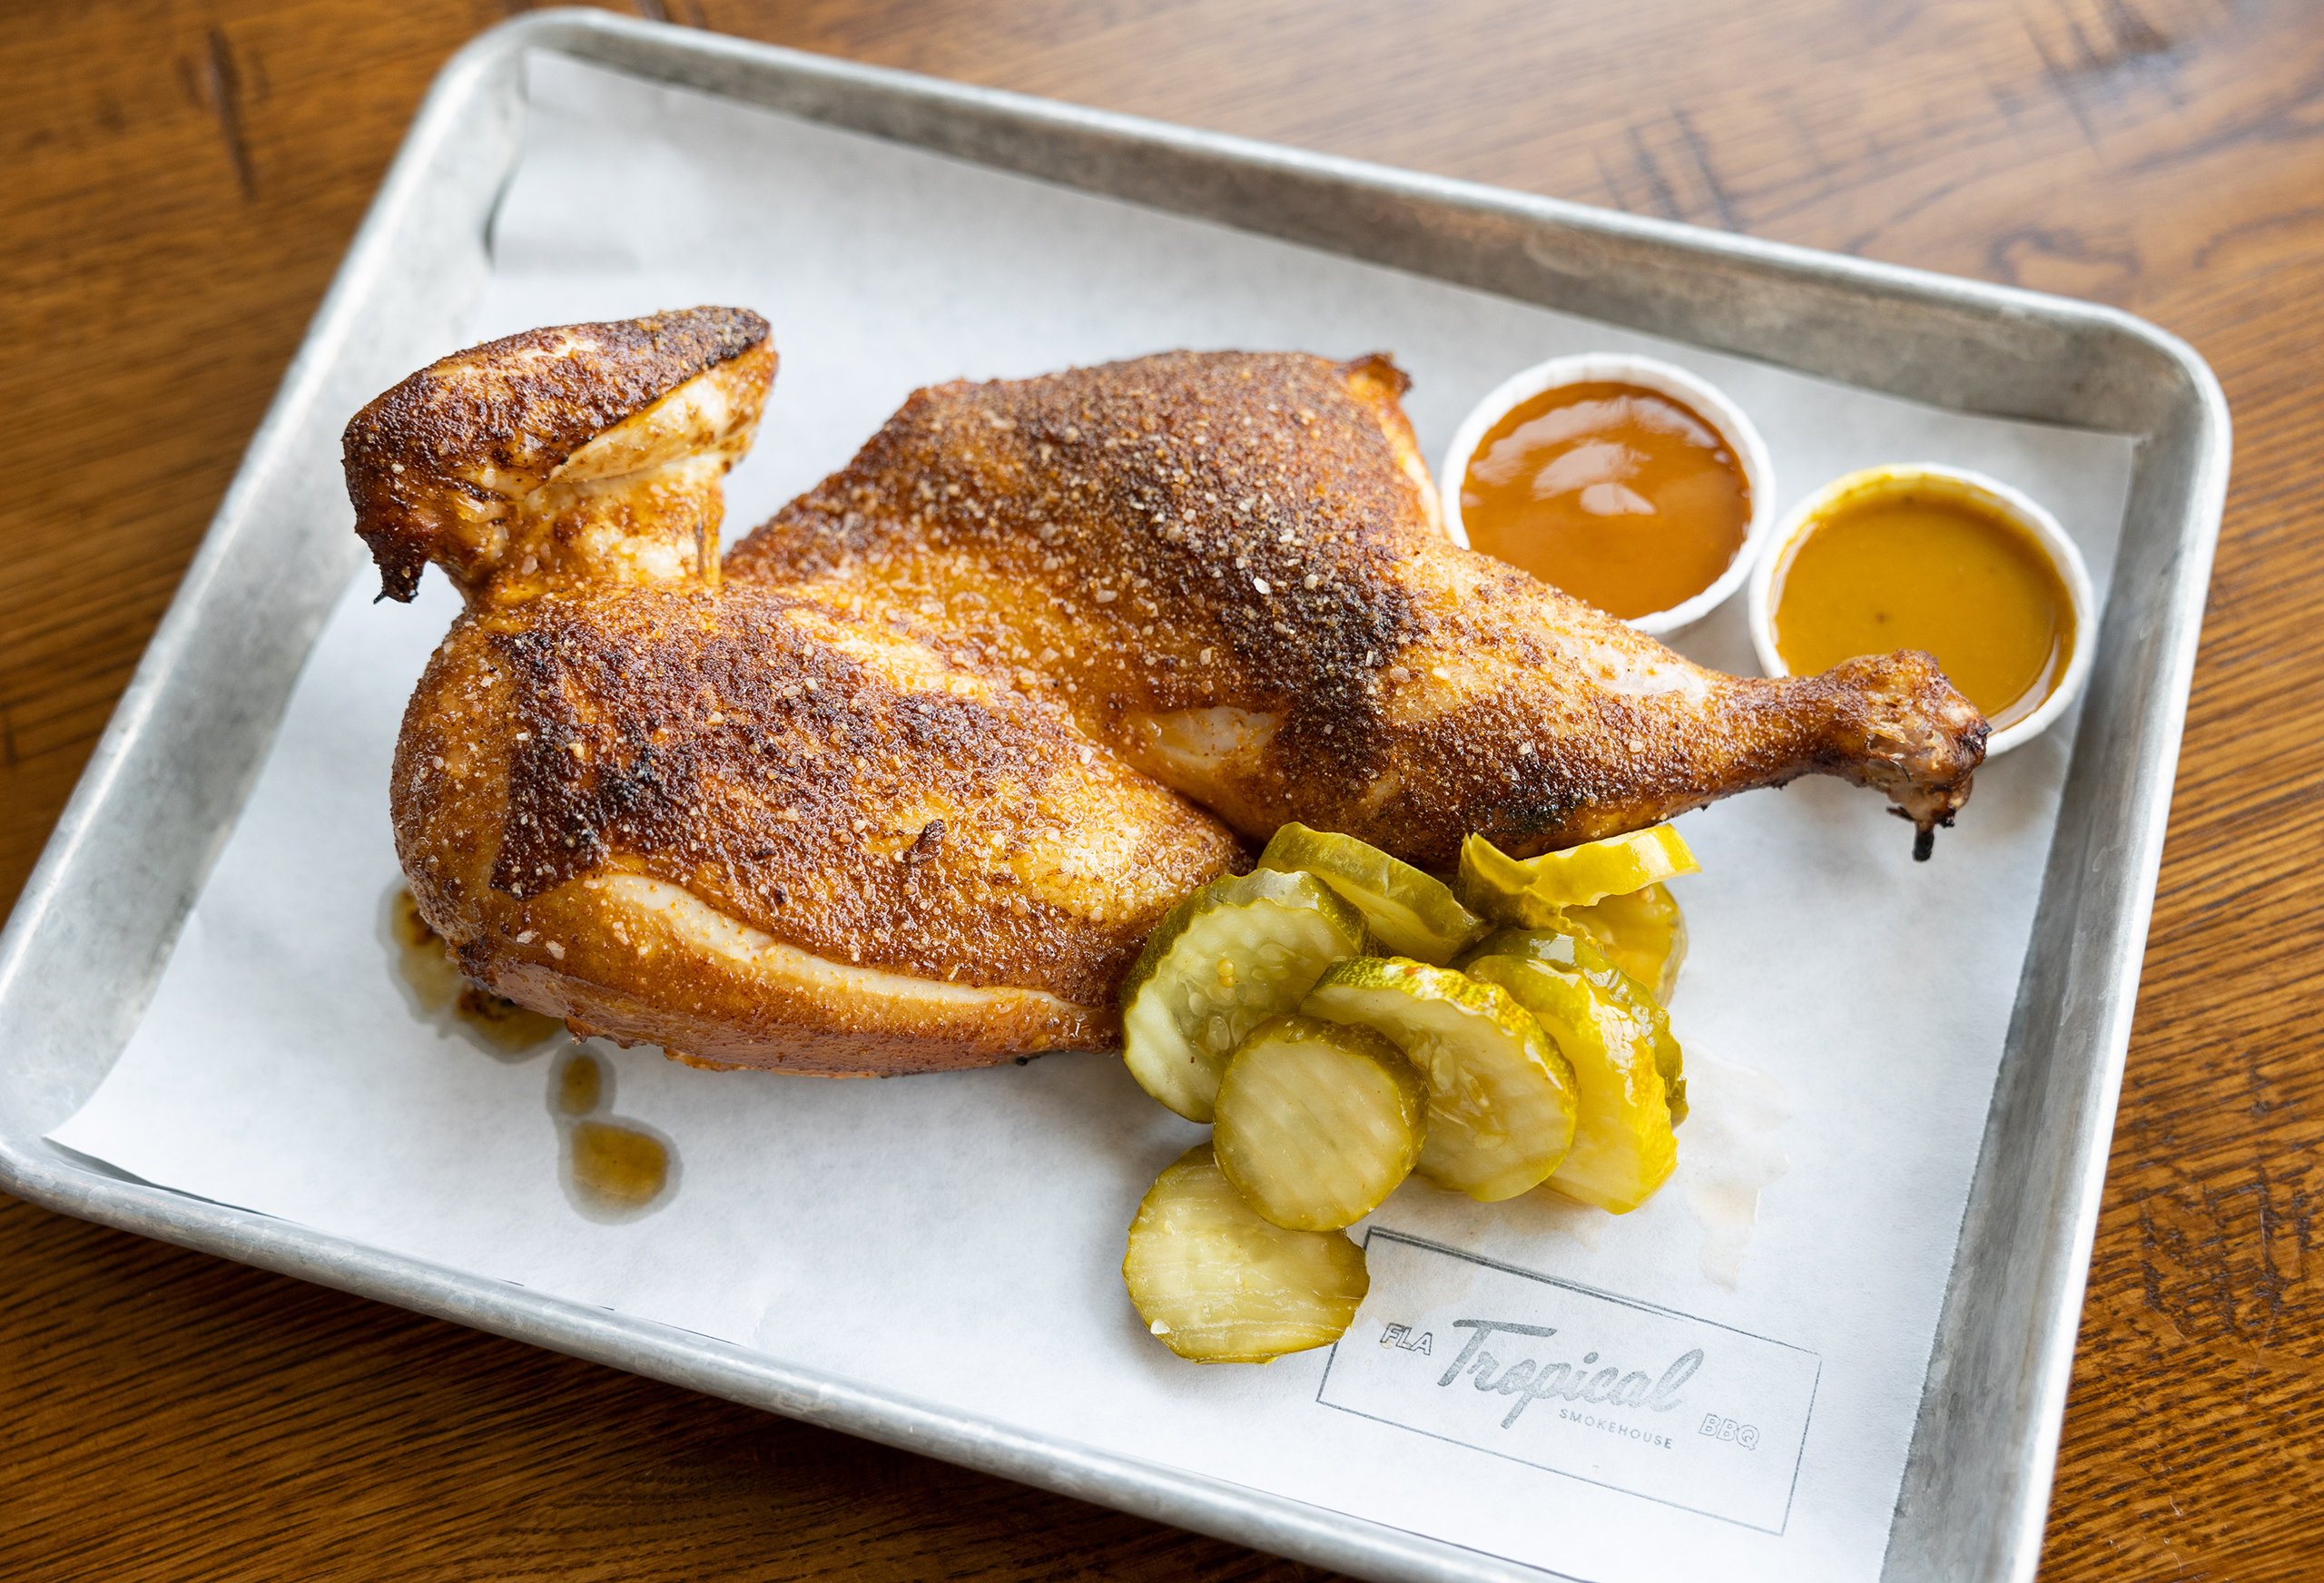 Smoked chicken with a side of pickles and of mango habanero hot sauce. The dish is on a metal tray with a branded Tropical Smokehouse parchment sheet.